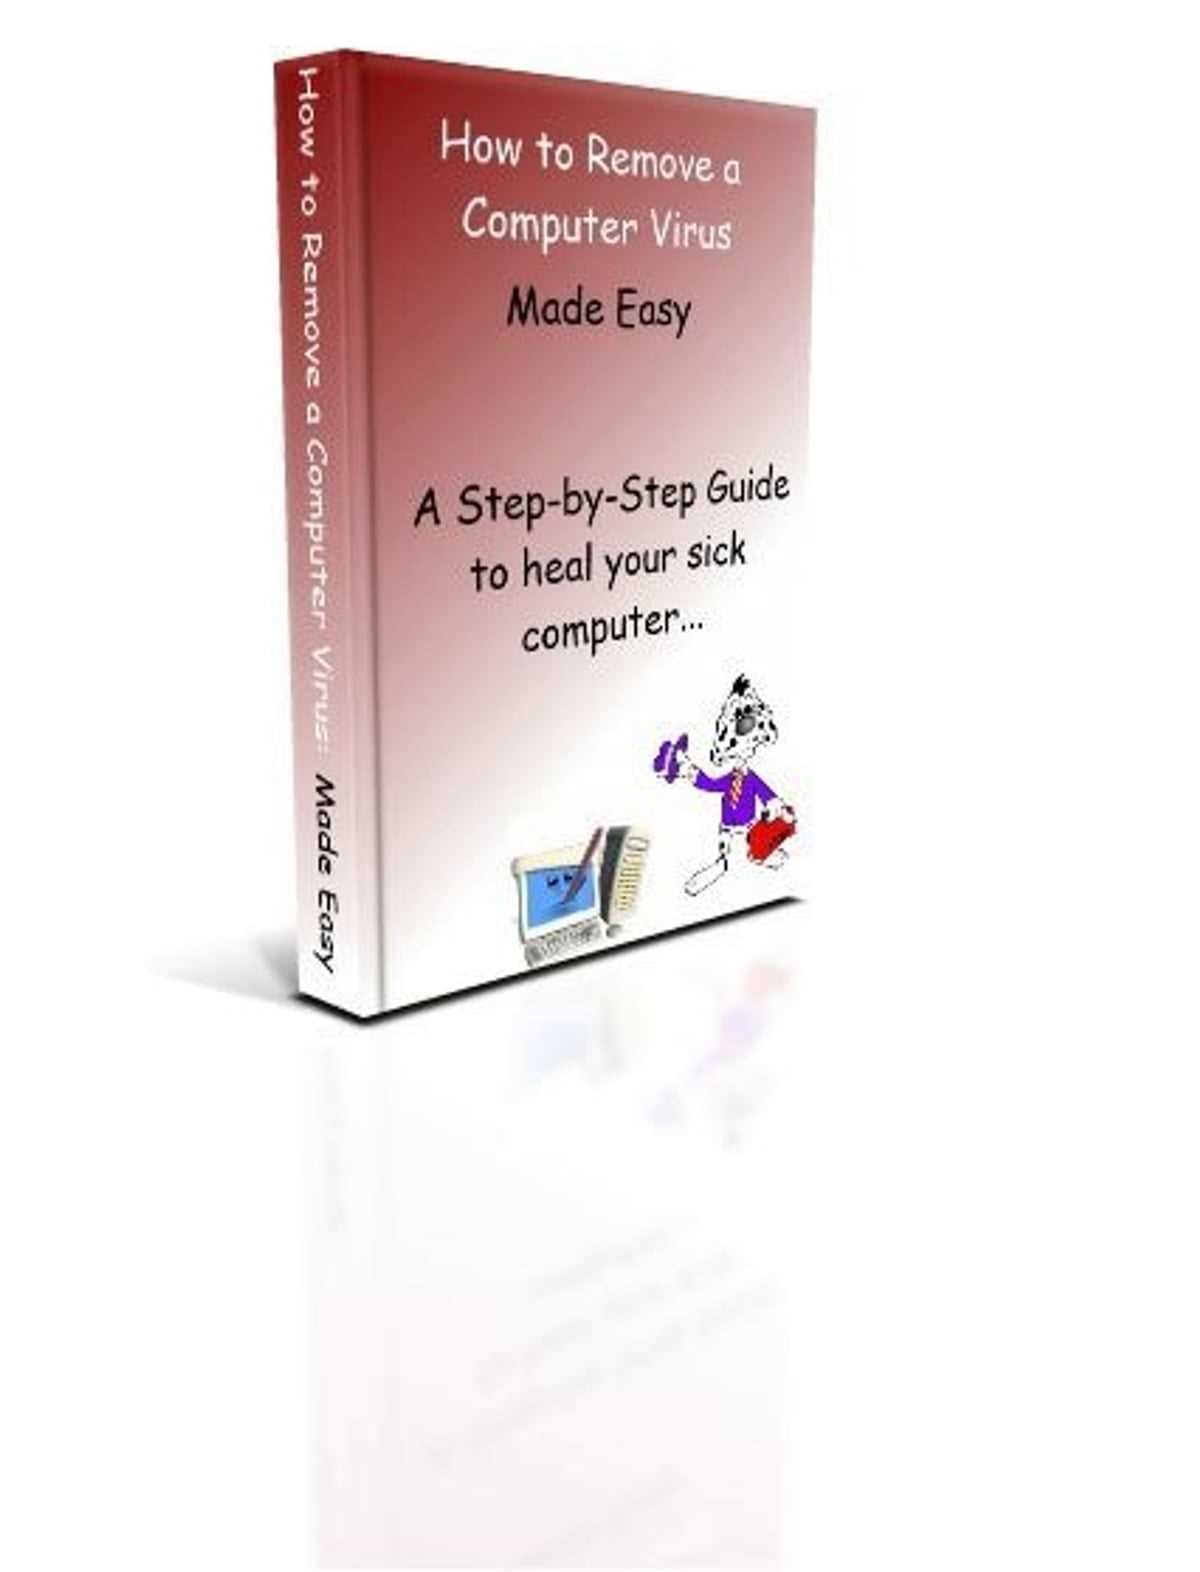 How to Remove a Virus from Your Computer Step-by-Step Guide